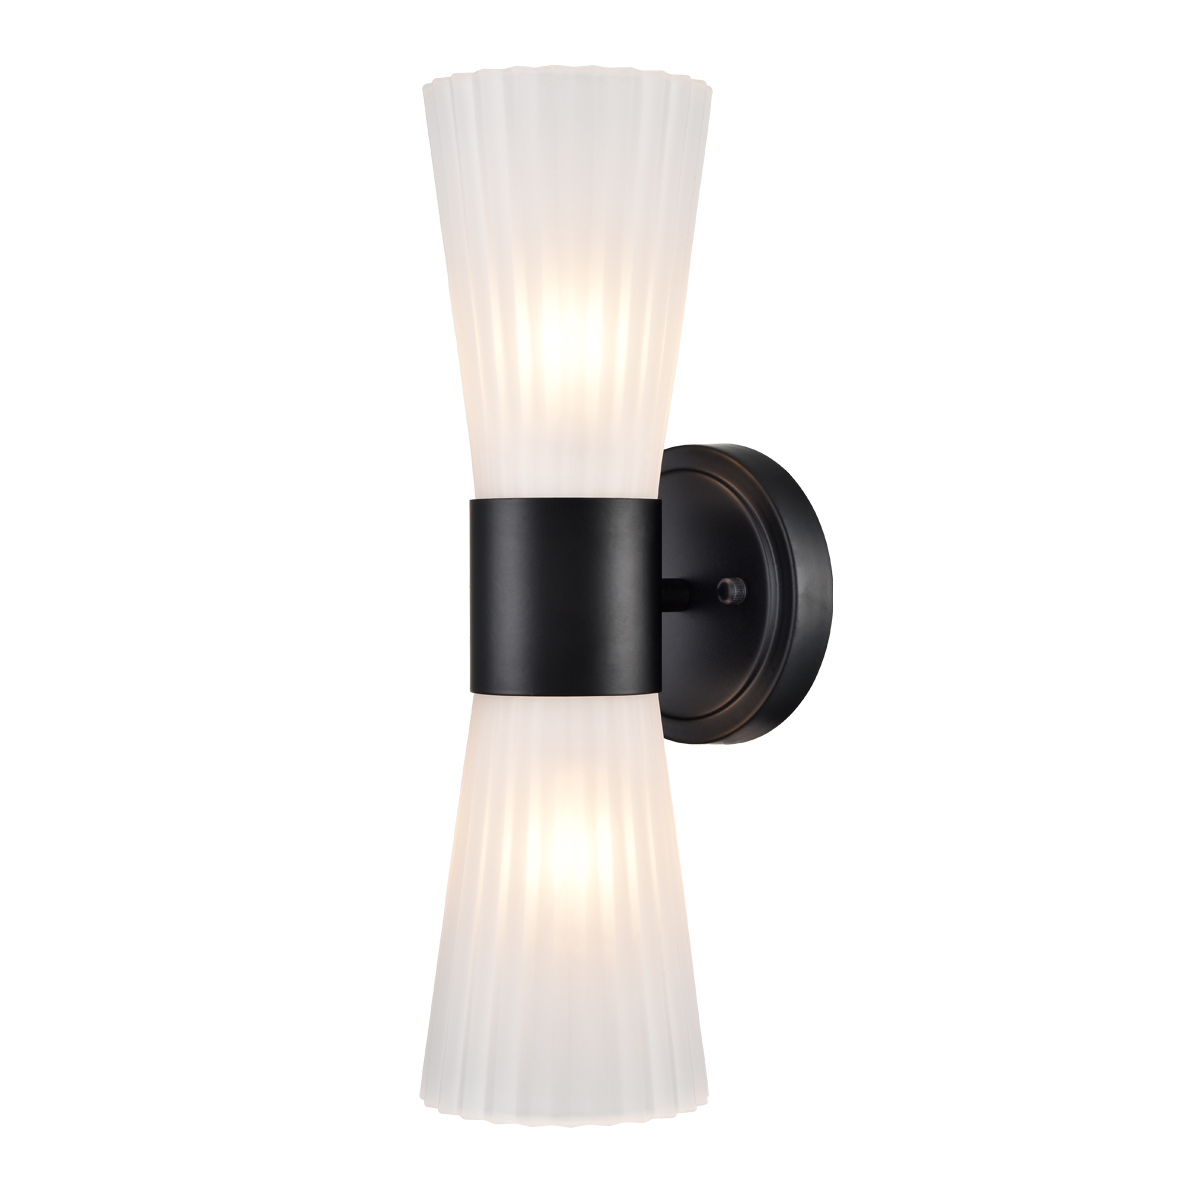 Modern Wall Vanity Light Fixture Black Wall Sconce, Adjustable Direction Up Down